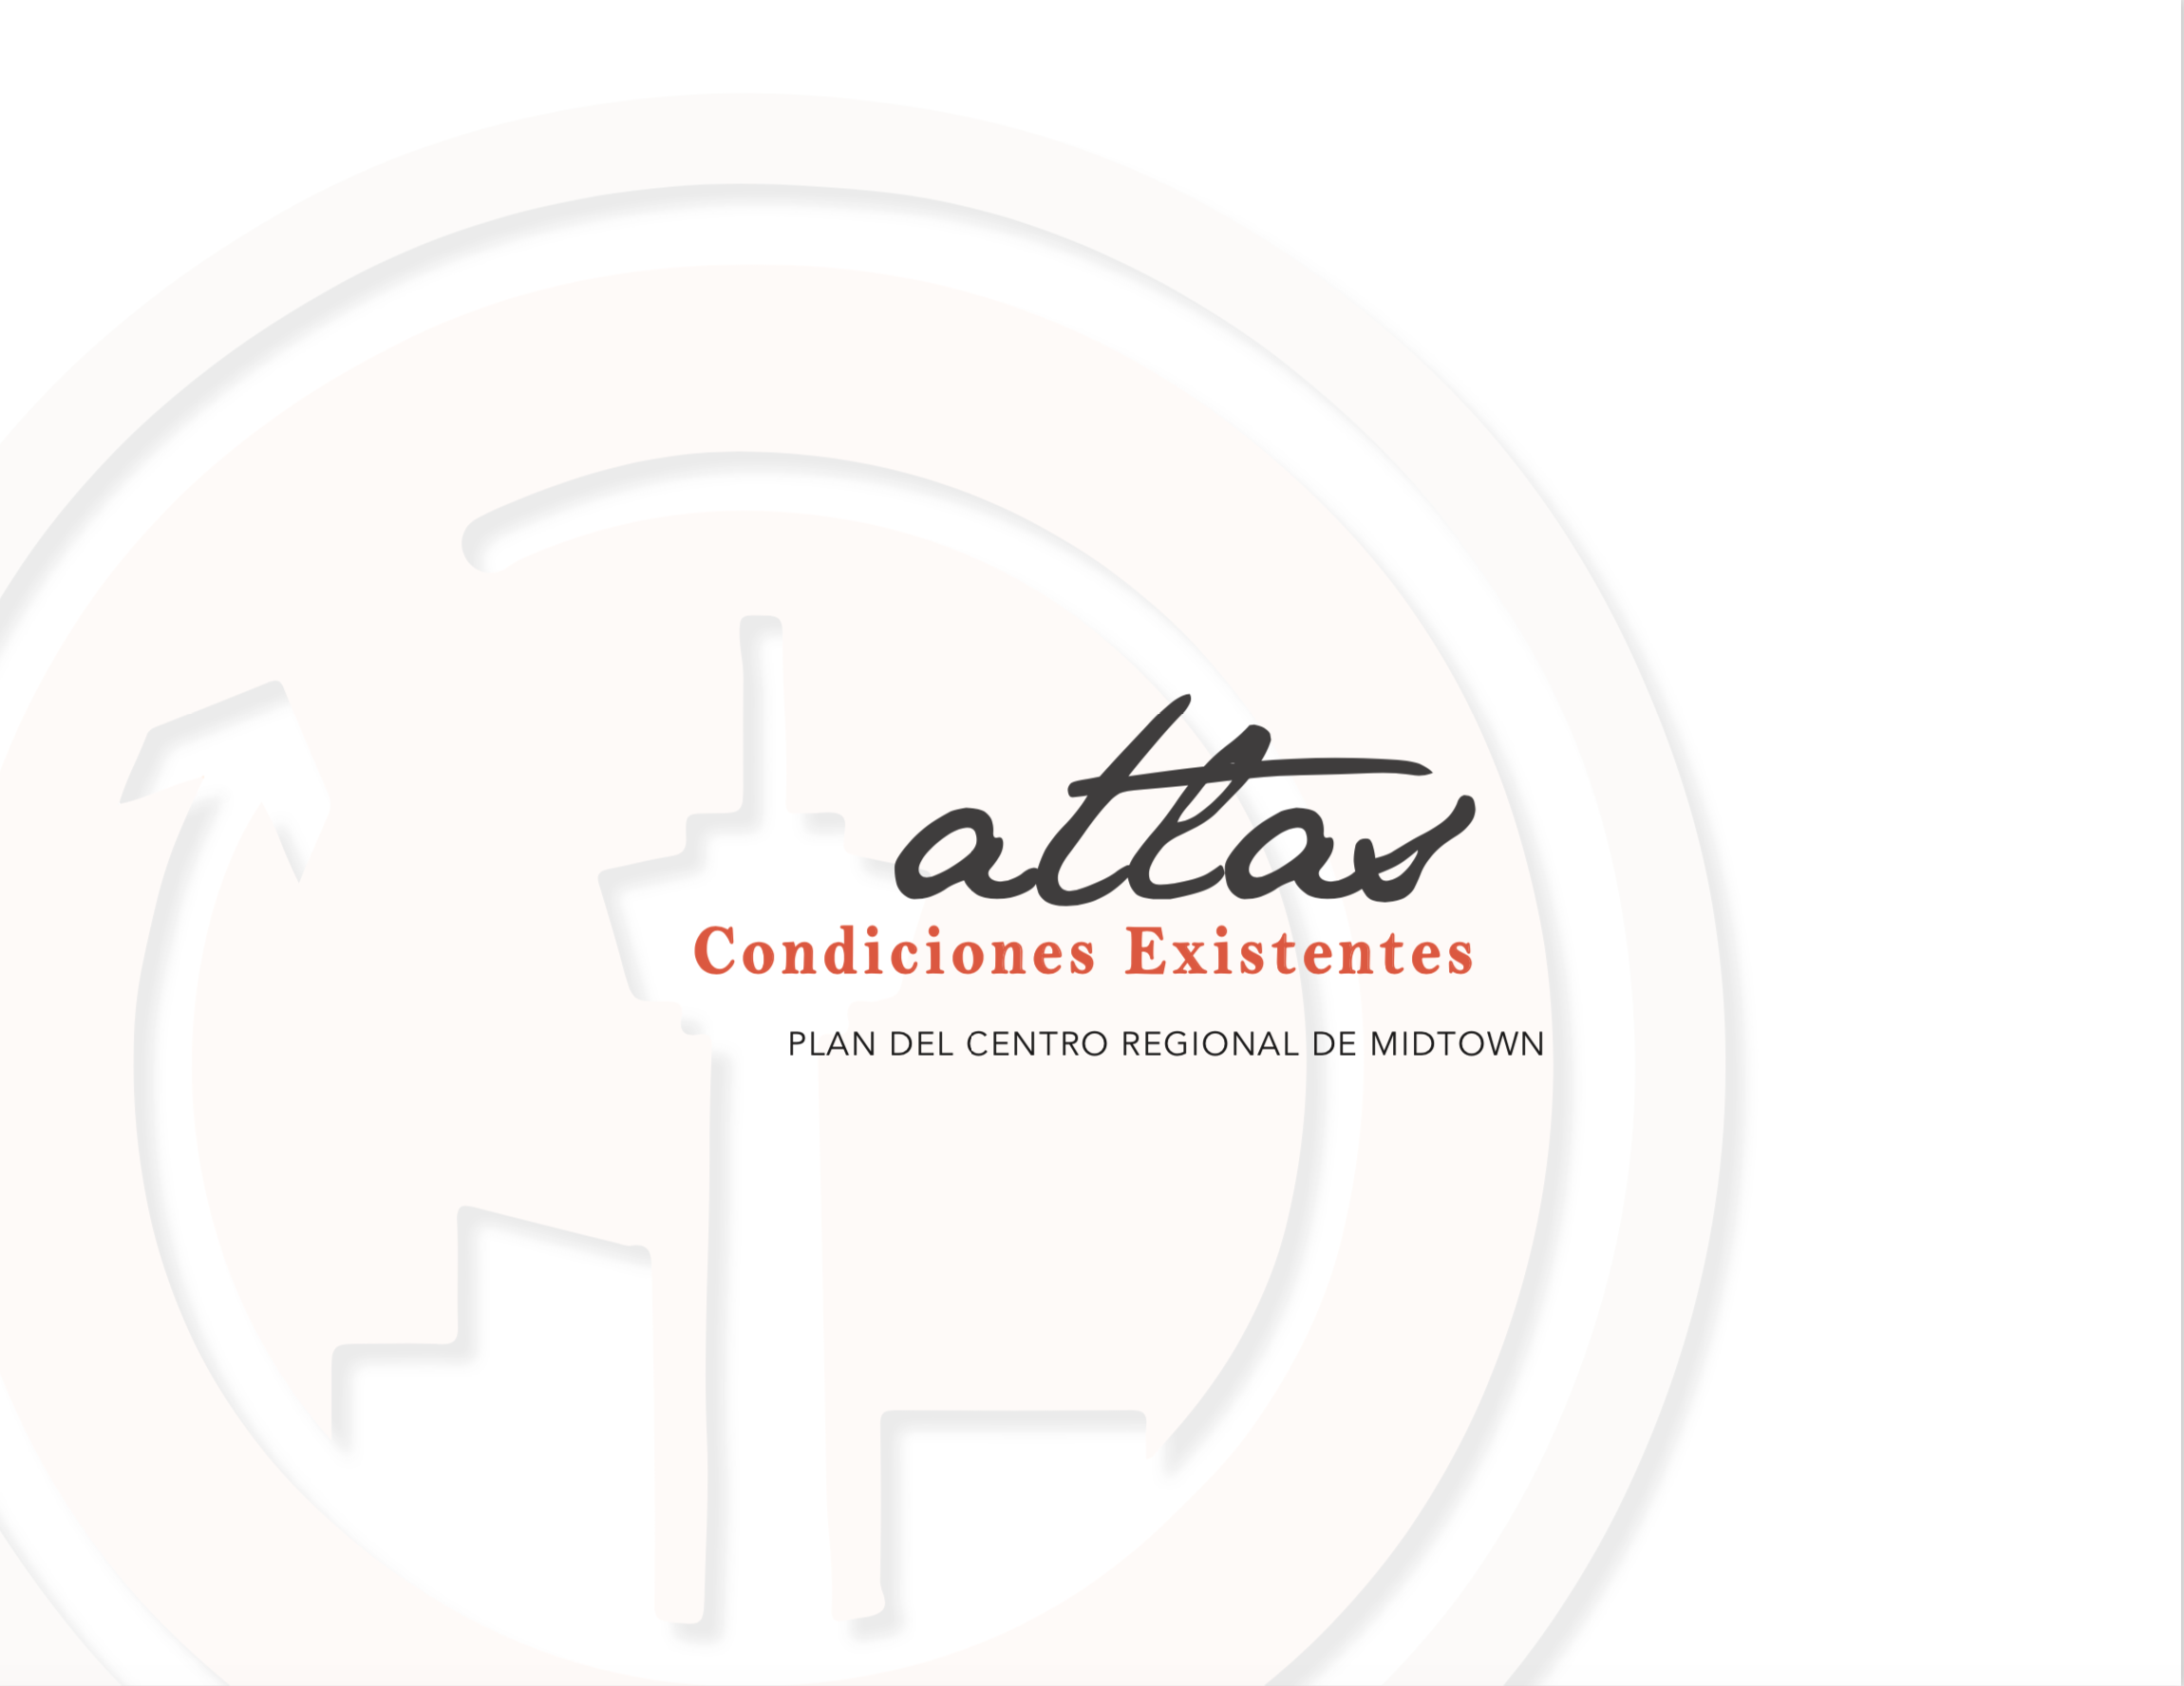 Cover sheet for existing conditions atlas.